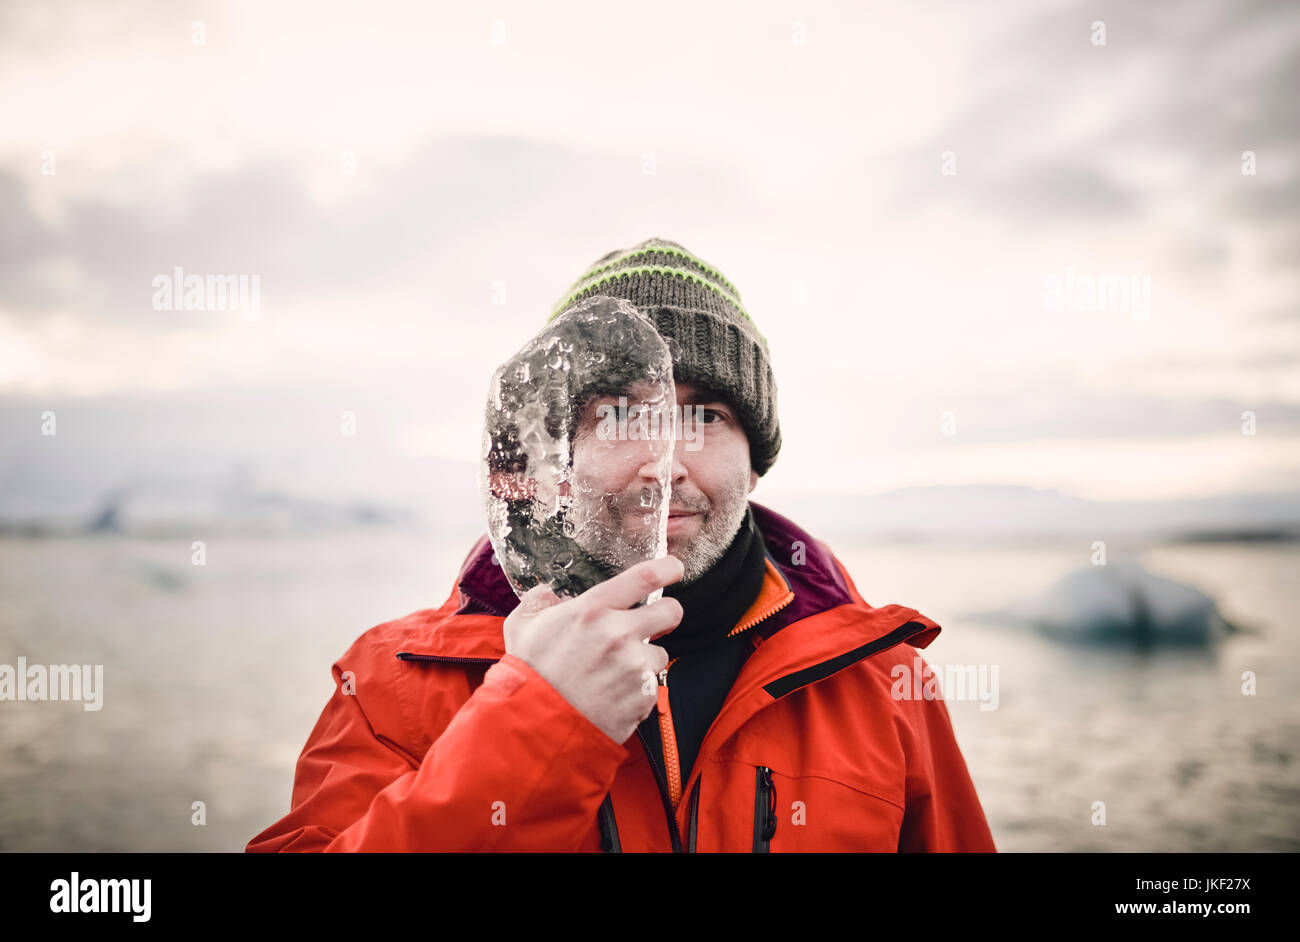 Iceland Man With A Piece Of Ice Covering Half Of His Face Stock Photo Alamy